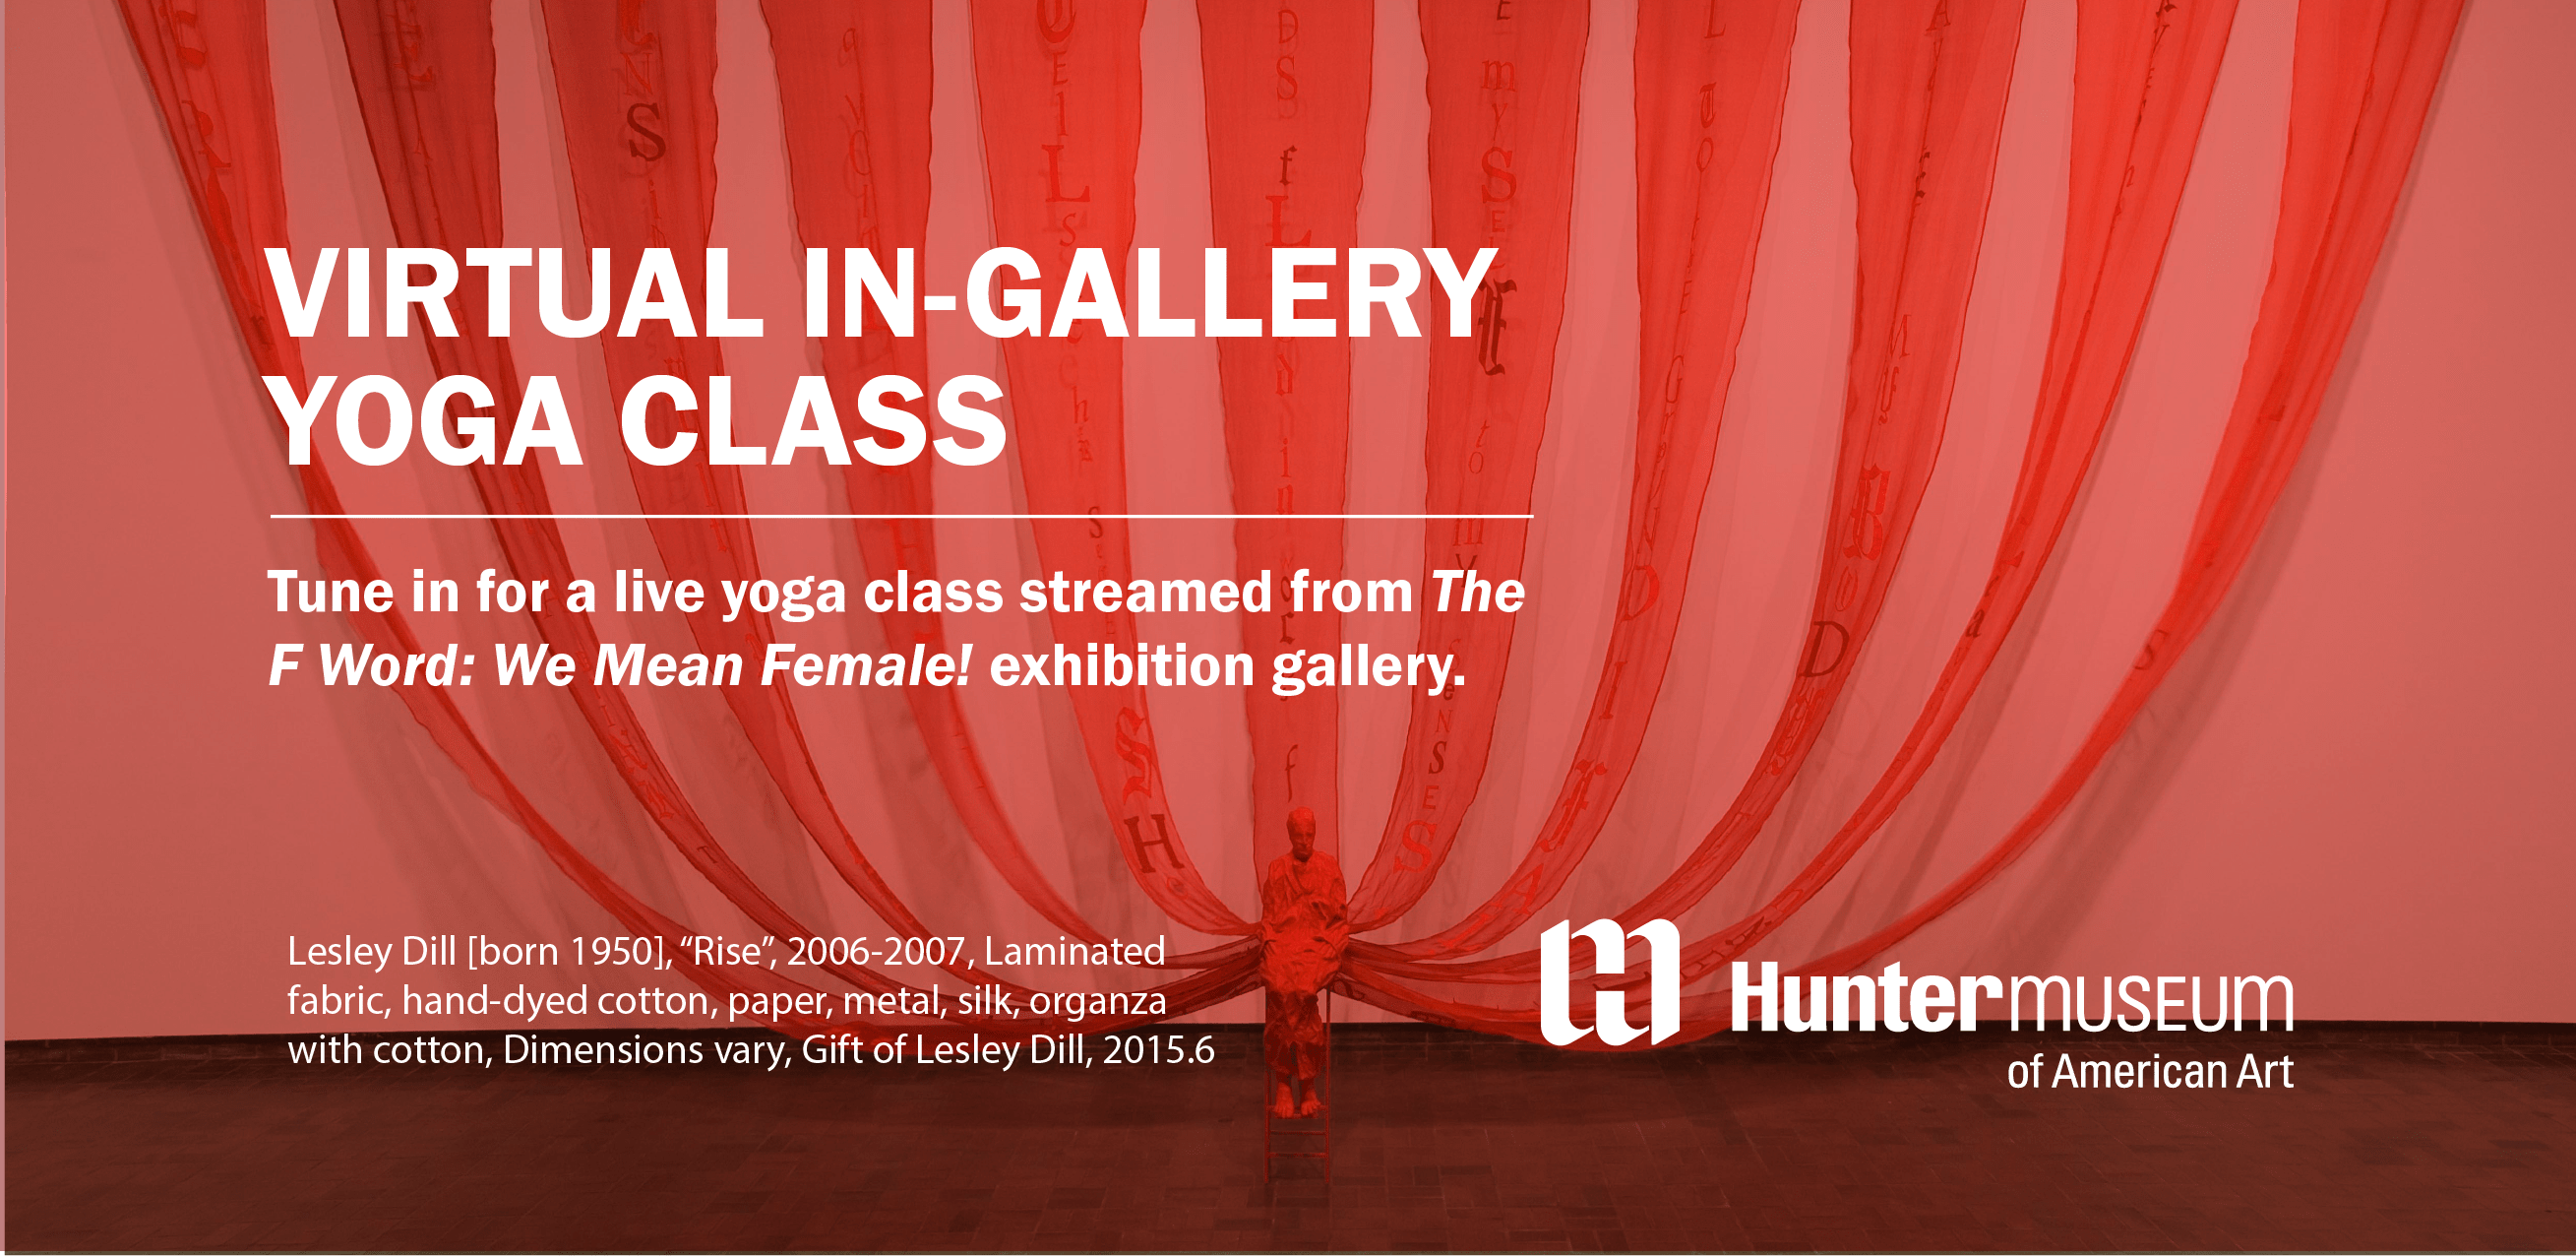 Background of large strips of red fabric hung high on the wall draped down and inward toward a statue of a person sitting in a chair cloaked in red. Text reads, "Tune in for a live yoga class streamed from The F Word: We Mean Female! exhibition gallery."